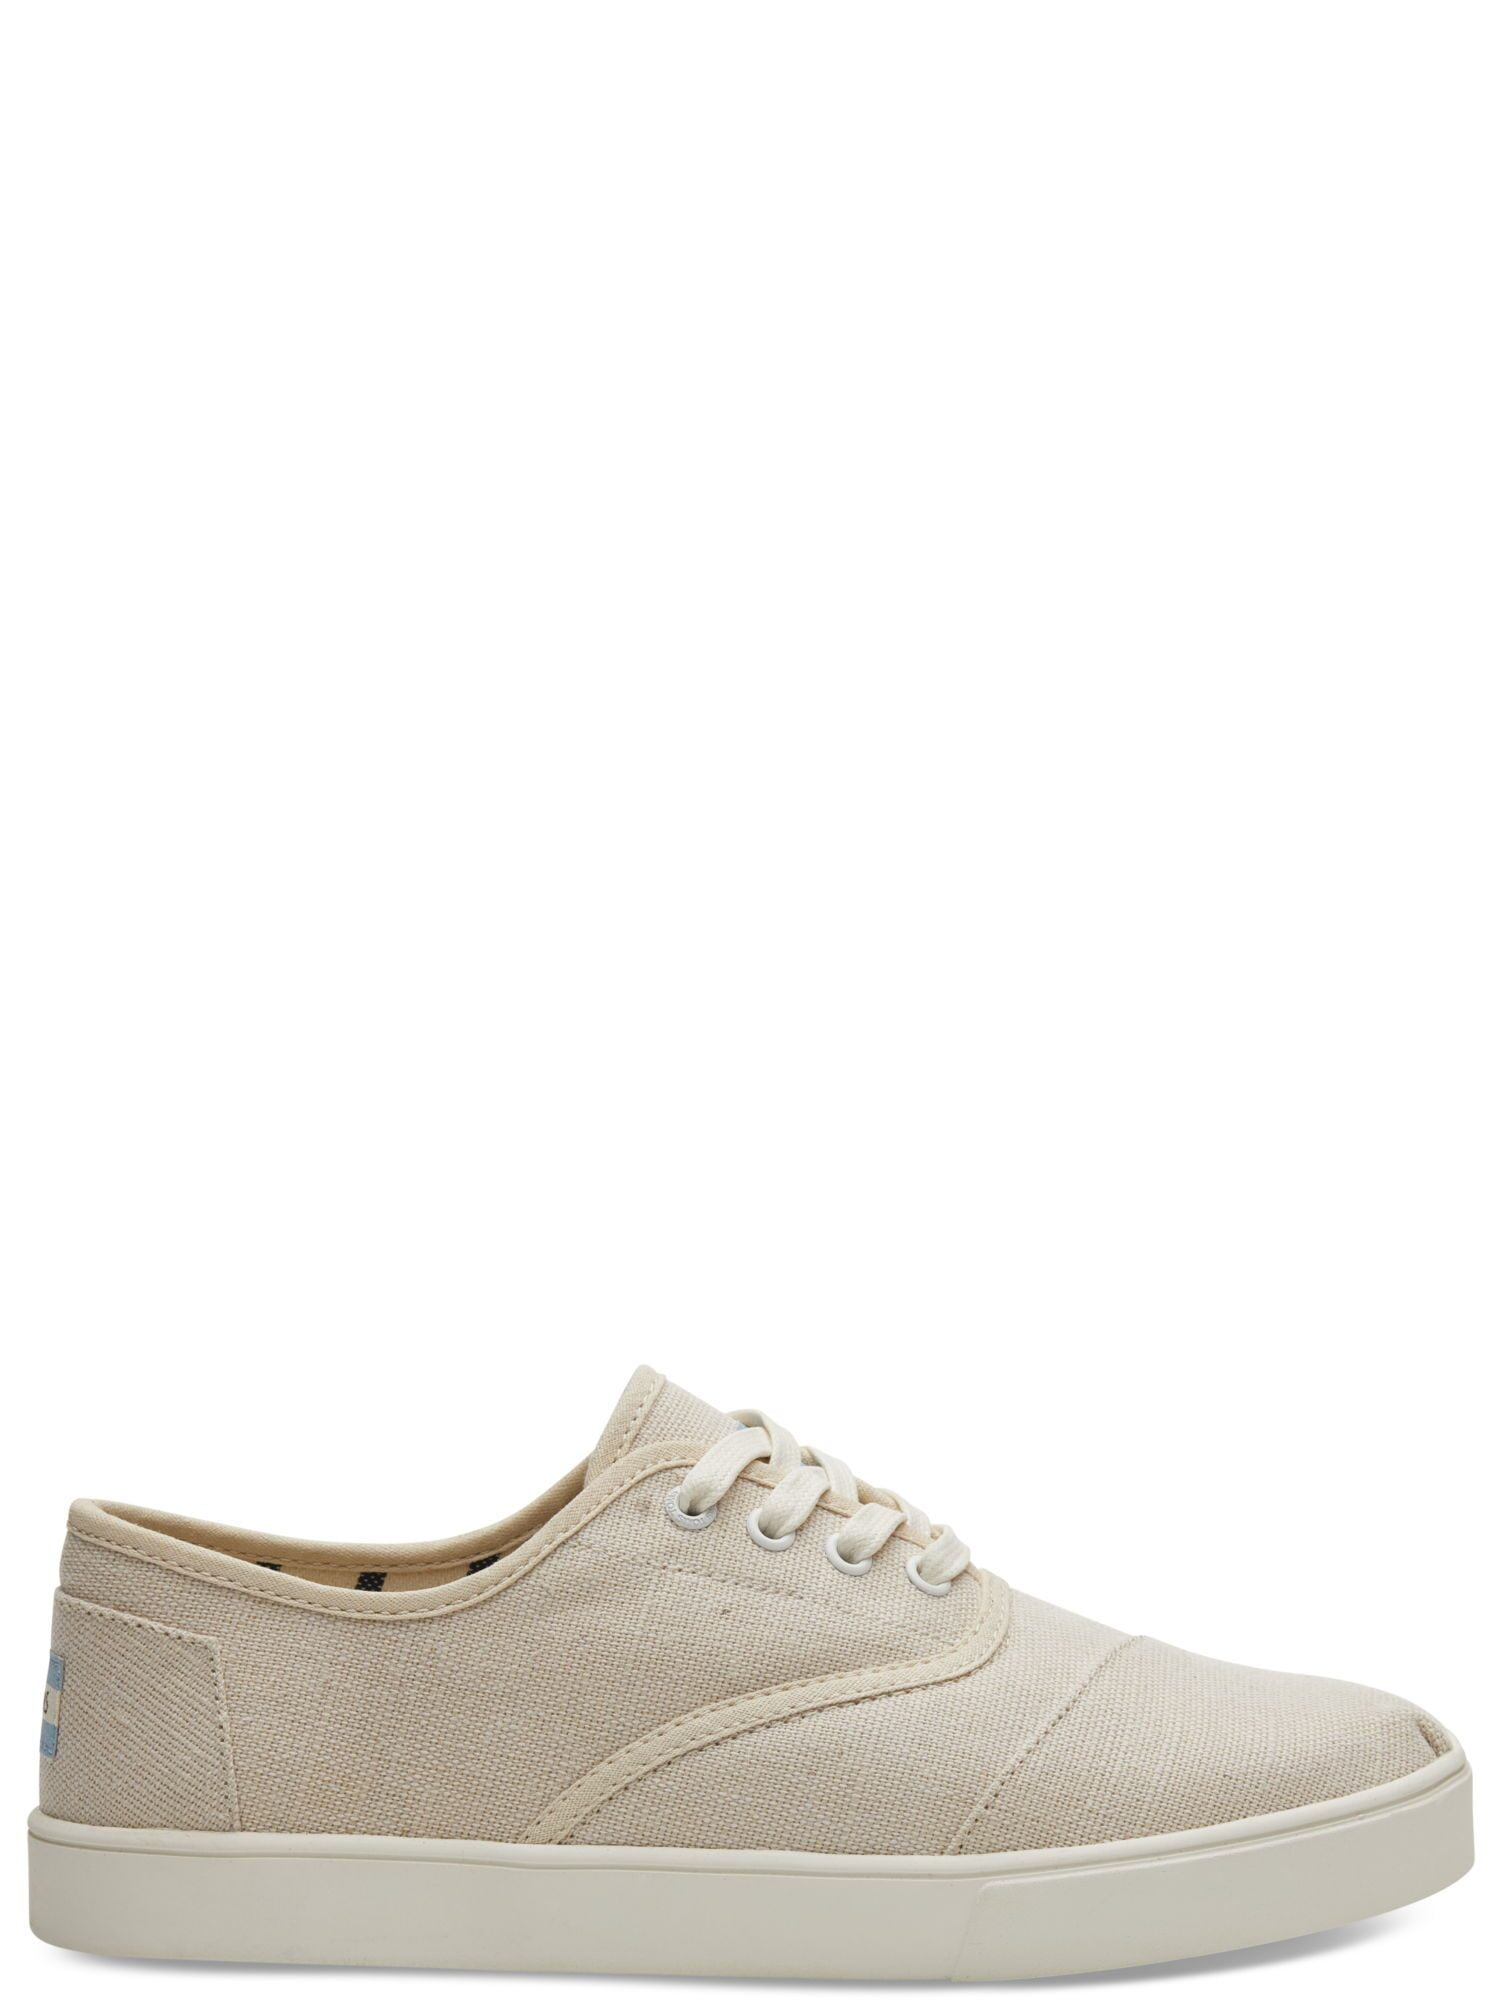 drizzle grey heritage canvas mens carlo sneakers topanga collection